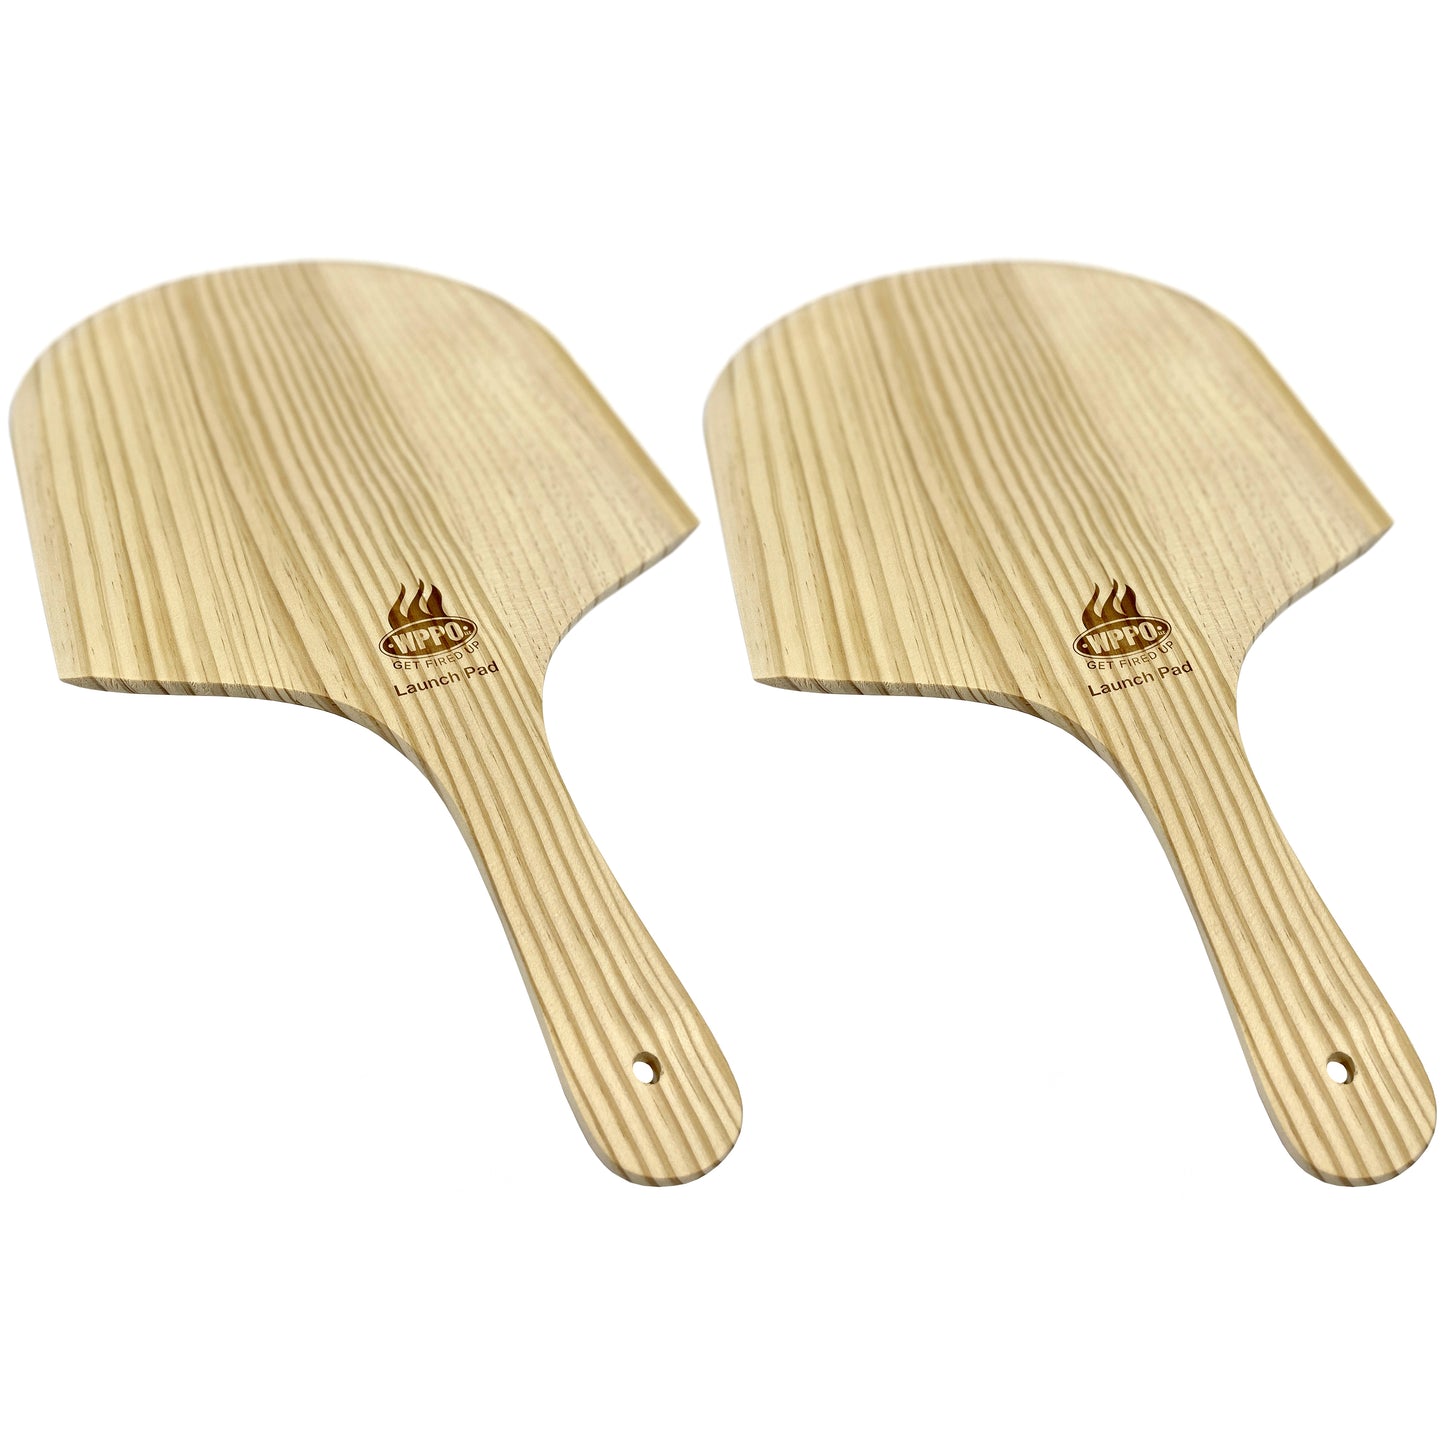 12” Square New Zealand Wooden Pizza Peel 2 pack - Save 50%